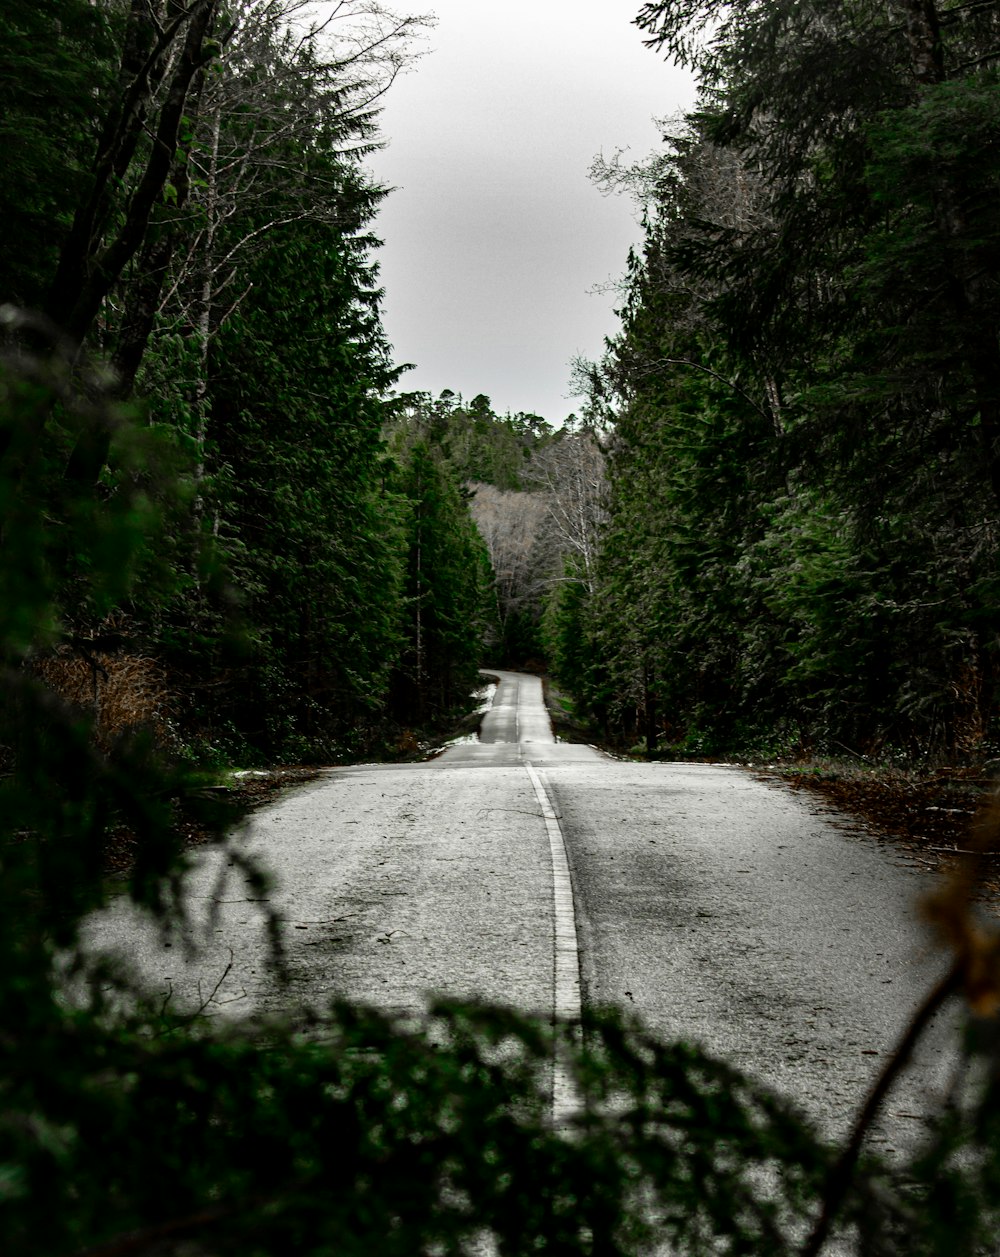 a wet road surrounded by trees and bushes